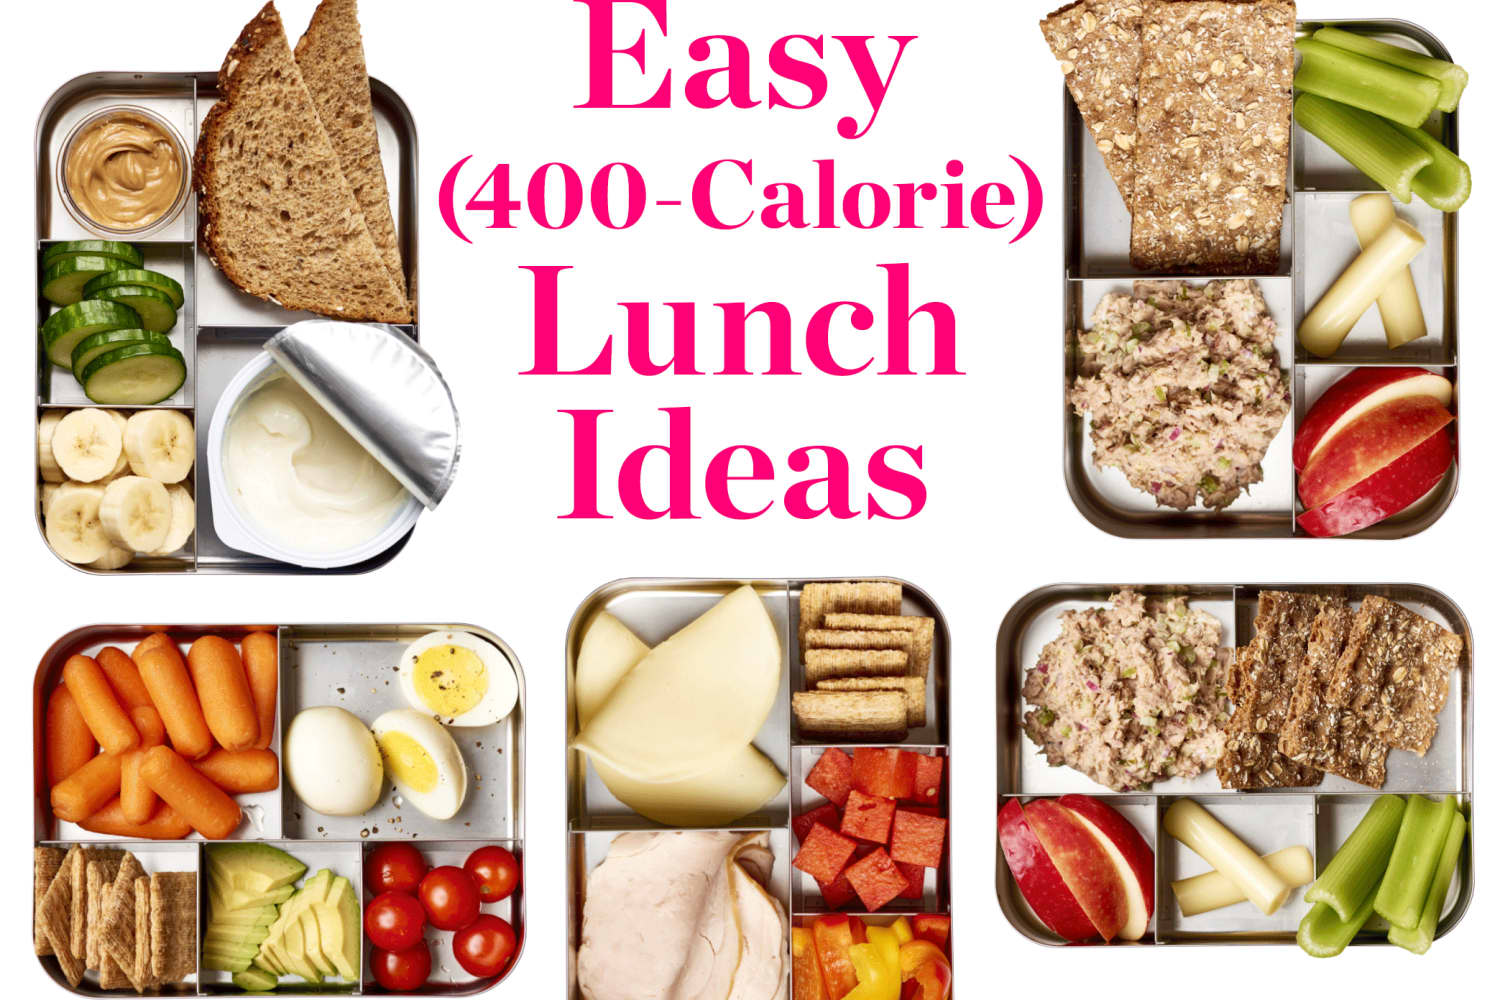 Healthy Lunch Ideas For Weight Loss: 80 Low-Calorie Lunch Recipes